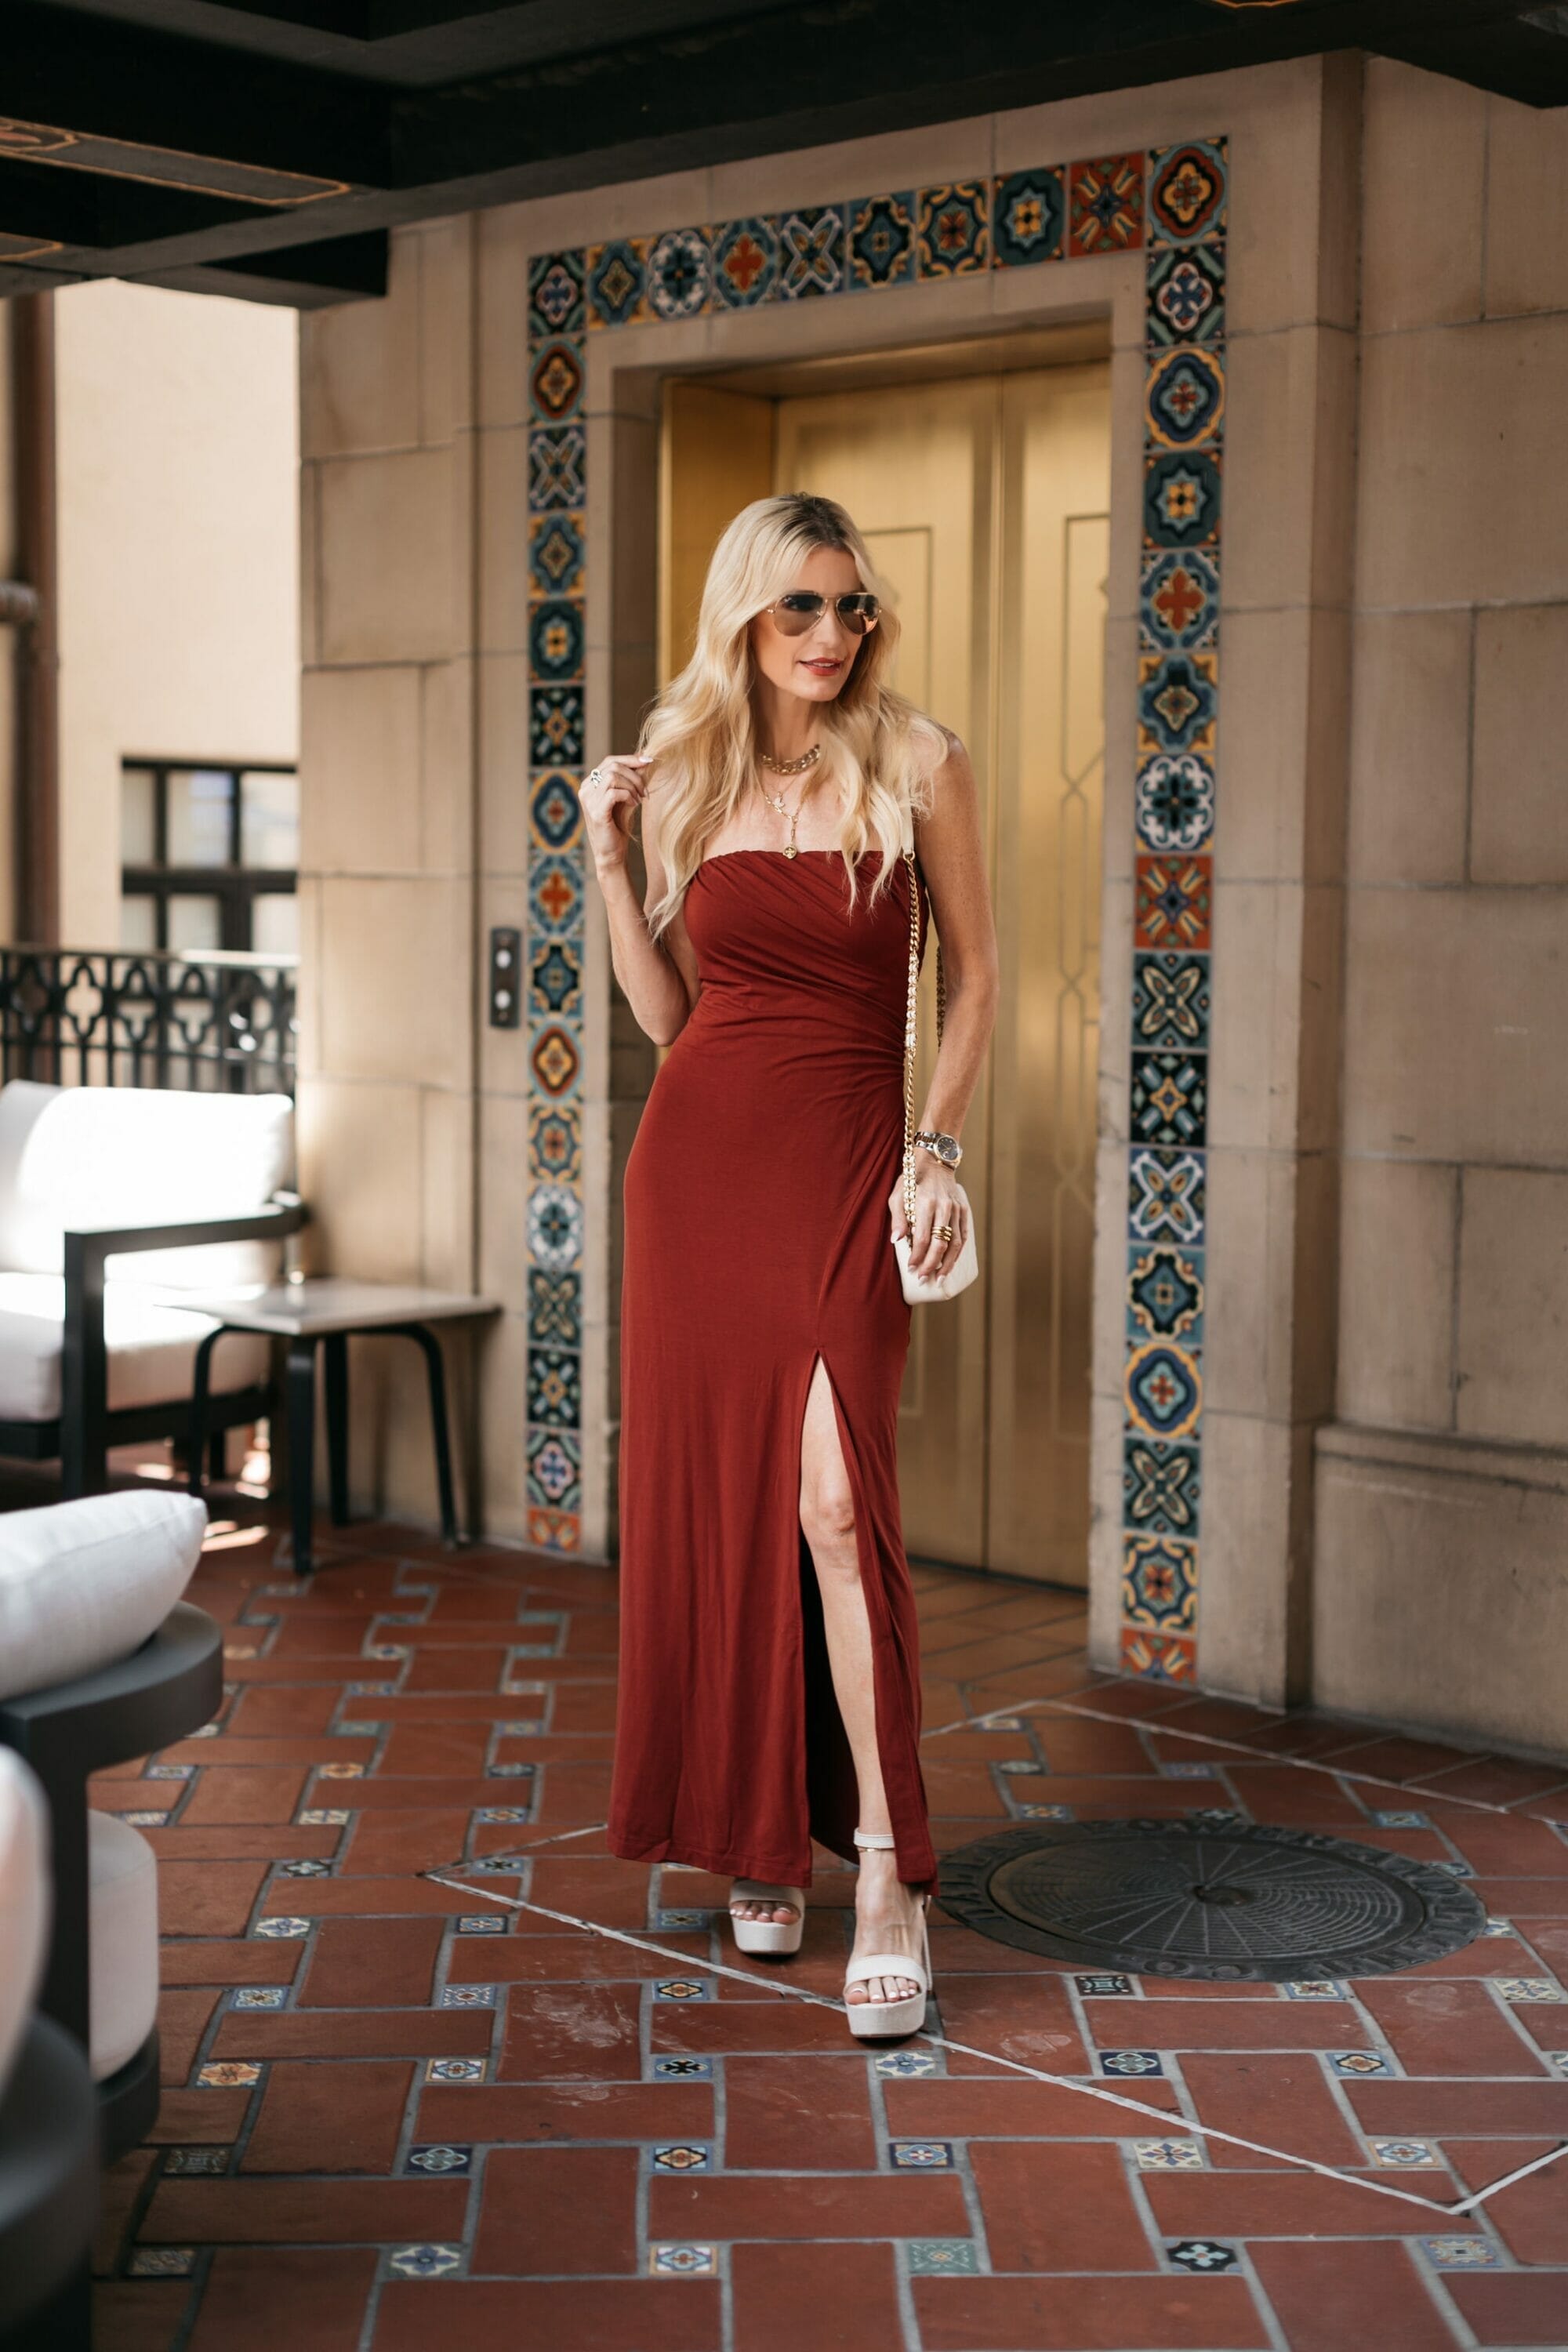 Dallas over 40 fashion influencer wearing red maxi dress with platform heels.